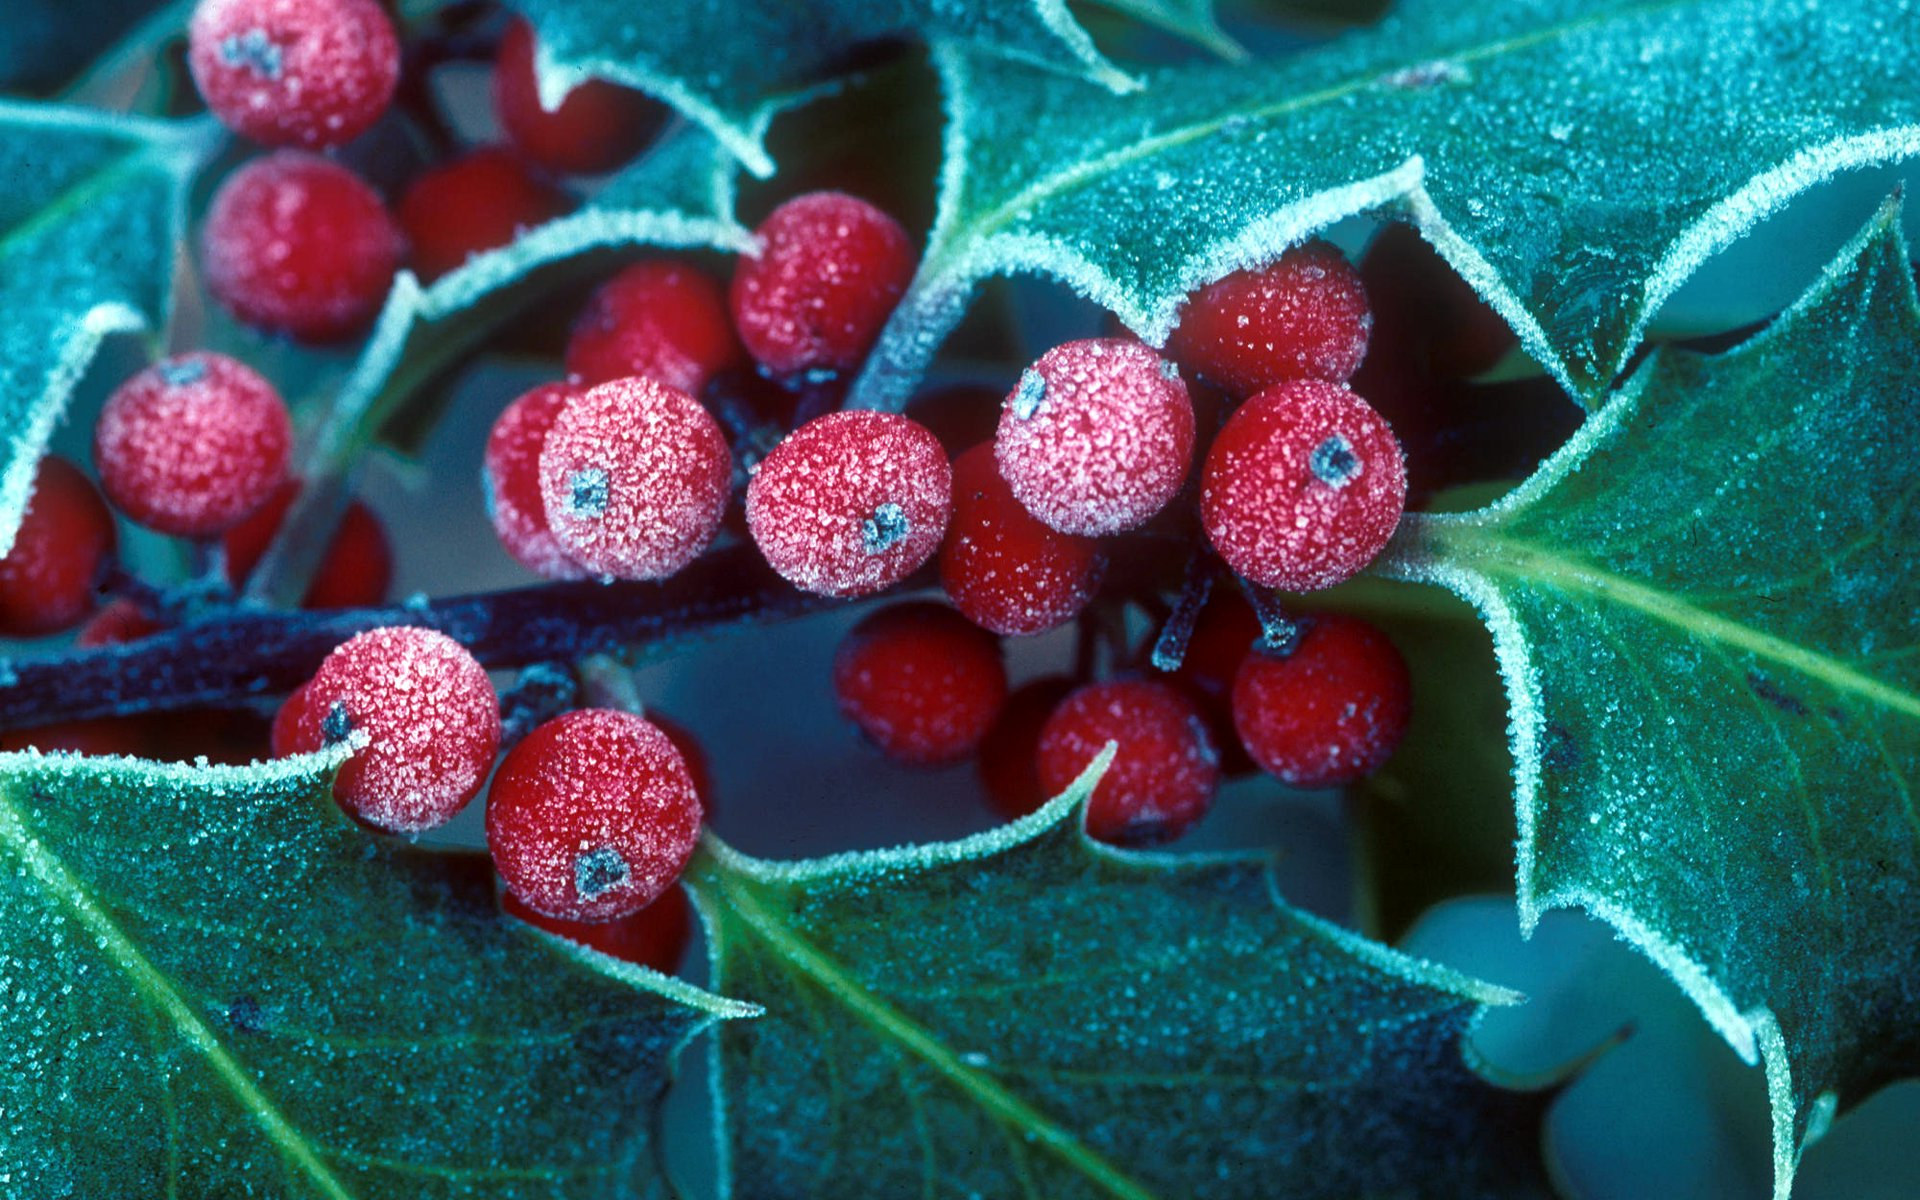 Frosted Holly Berries - Holly And Berries Frosted - HD Wallpaper 